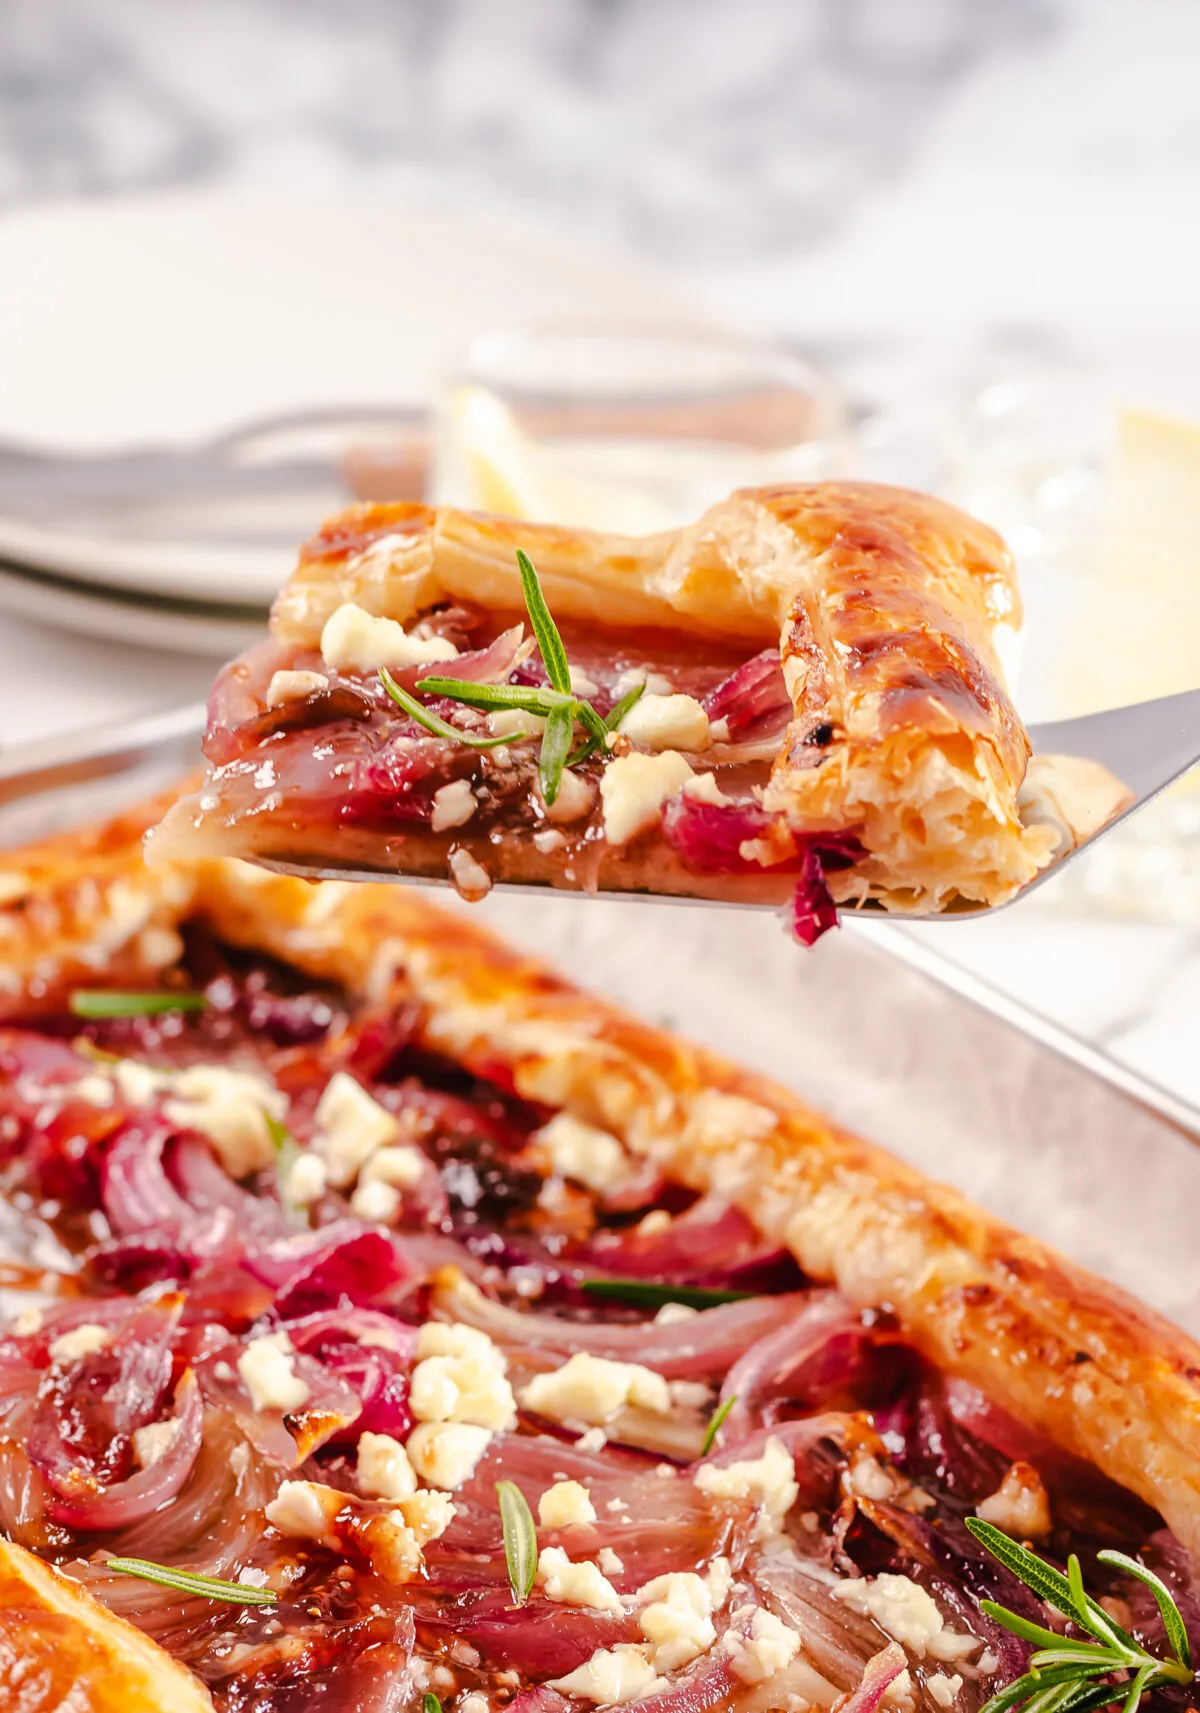 Up your dinner party game with this Caramelized Onion Tart recipe. With puff pastry, red onions, and feta cheese, it's an easy crowd pleaser.